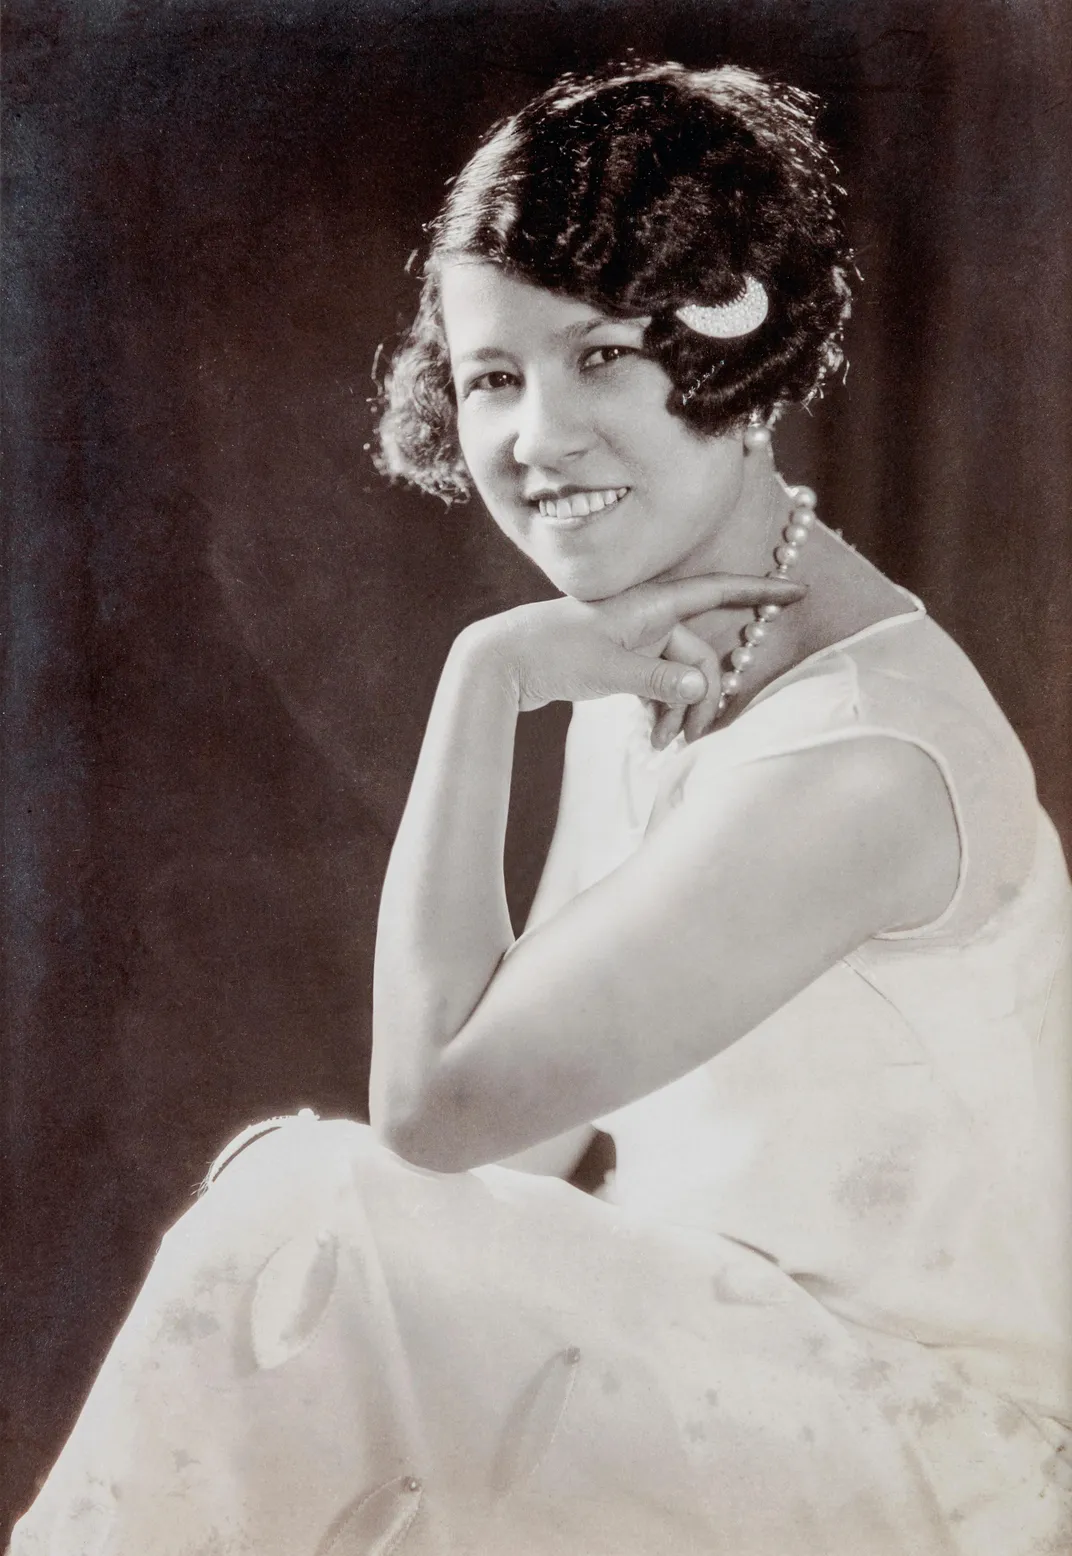 A posed studio portrait of Collins, a Black woman with short cropped hair in pearls and an elegant white dress